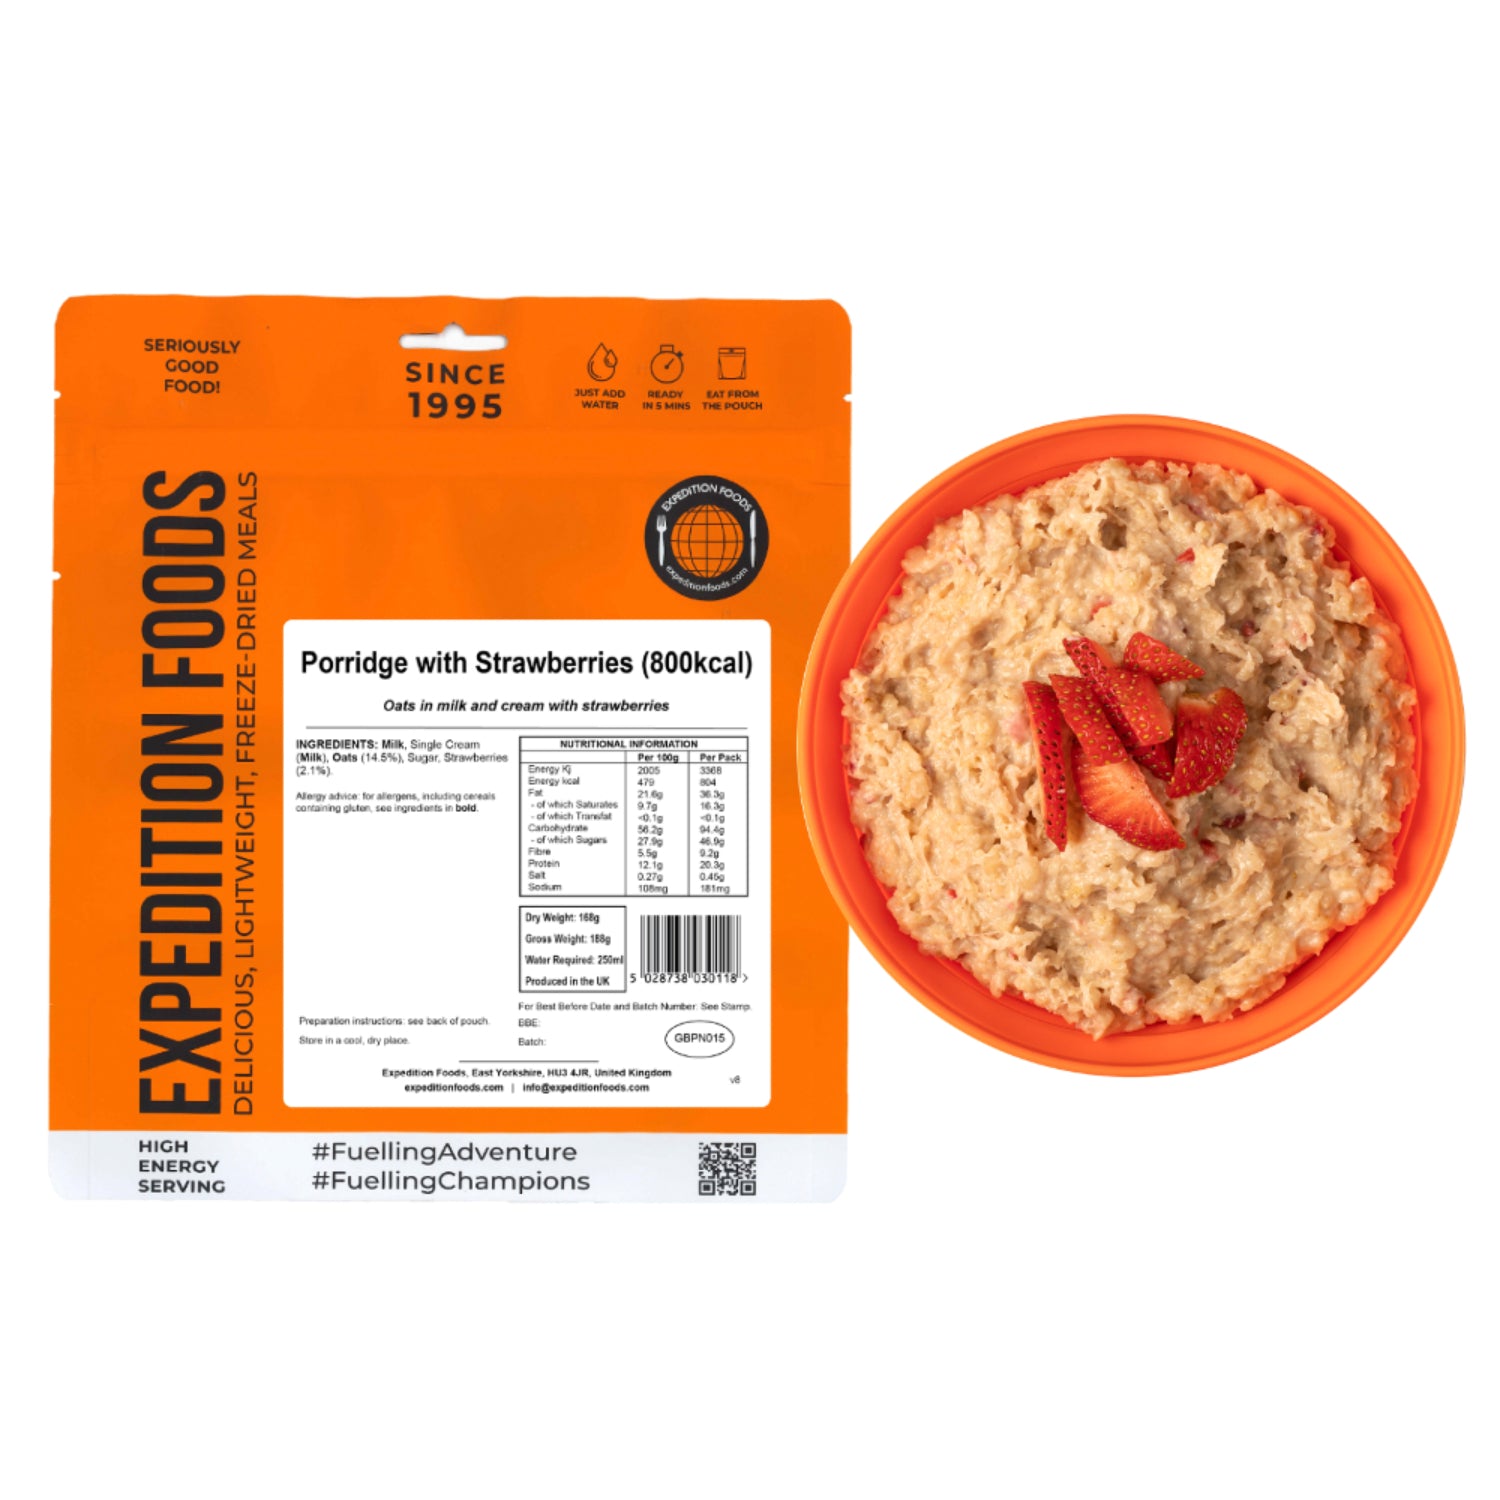 Expedition Foods Porridge with Strawberries (800kcal), dried camping food pack